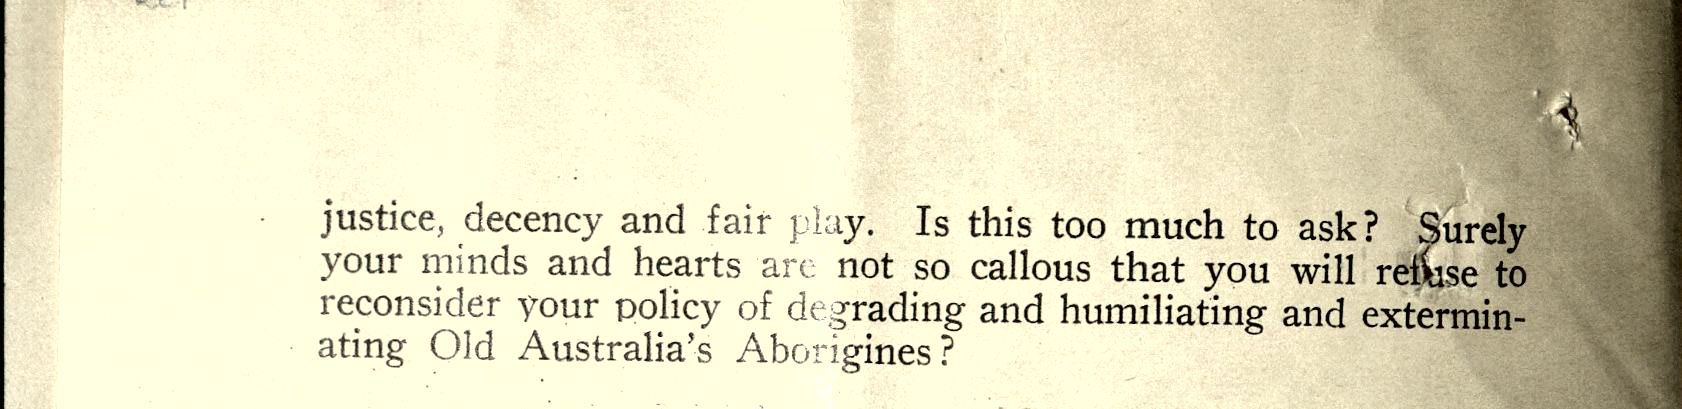 Page from the pamphlet - Aboriginies claim citizenship rights! 